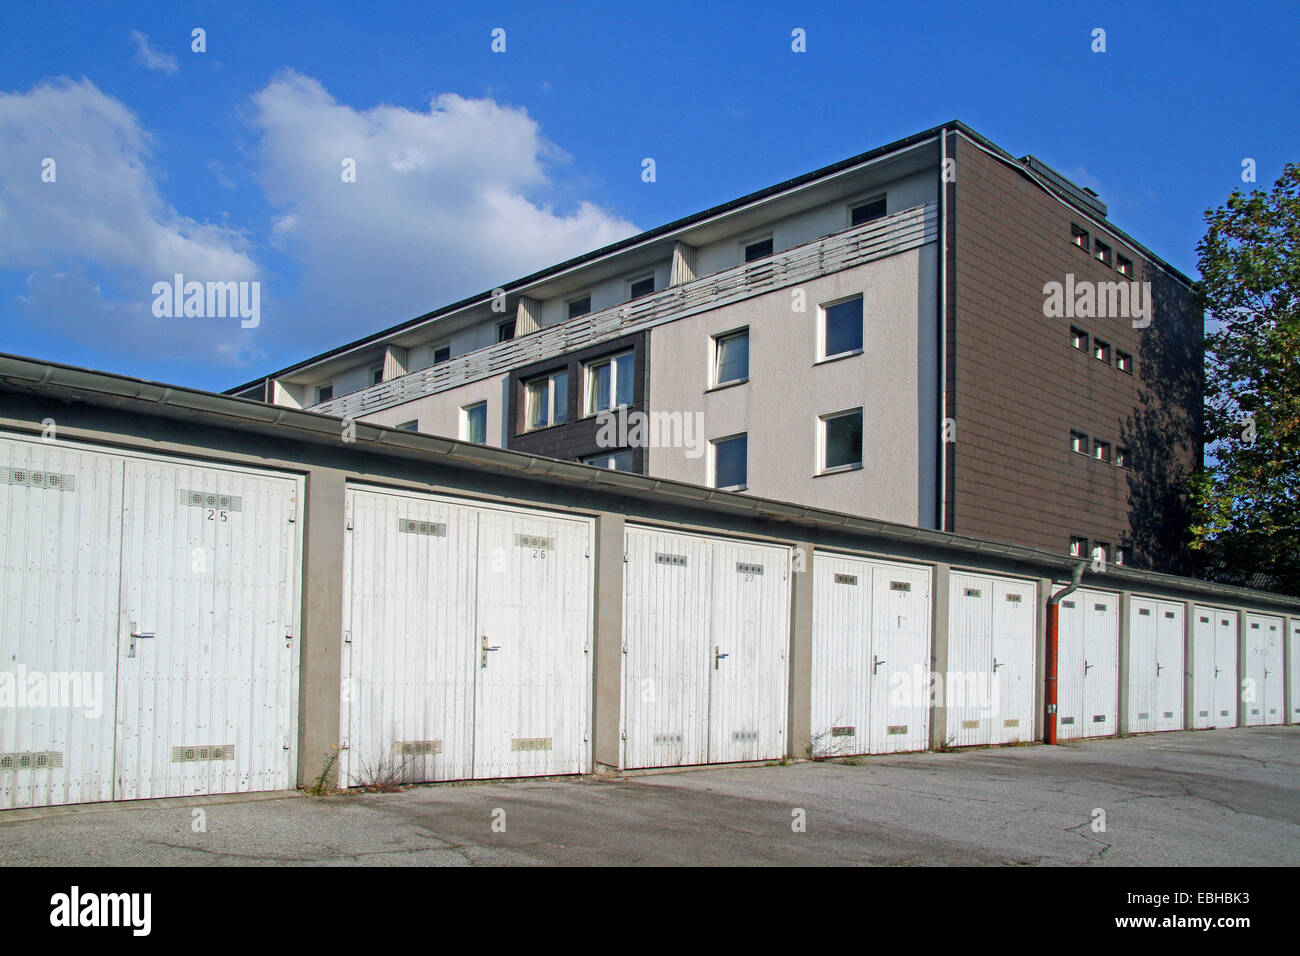 apartment house and garages, Germany Stock Photo